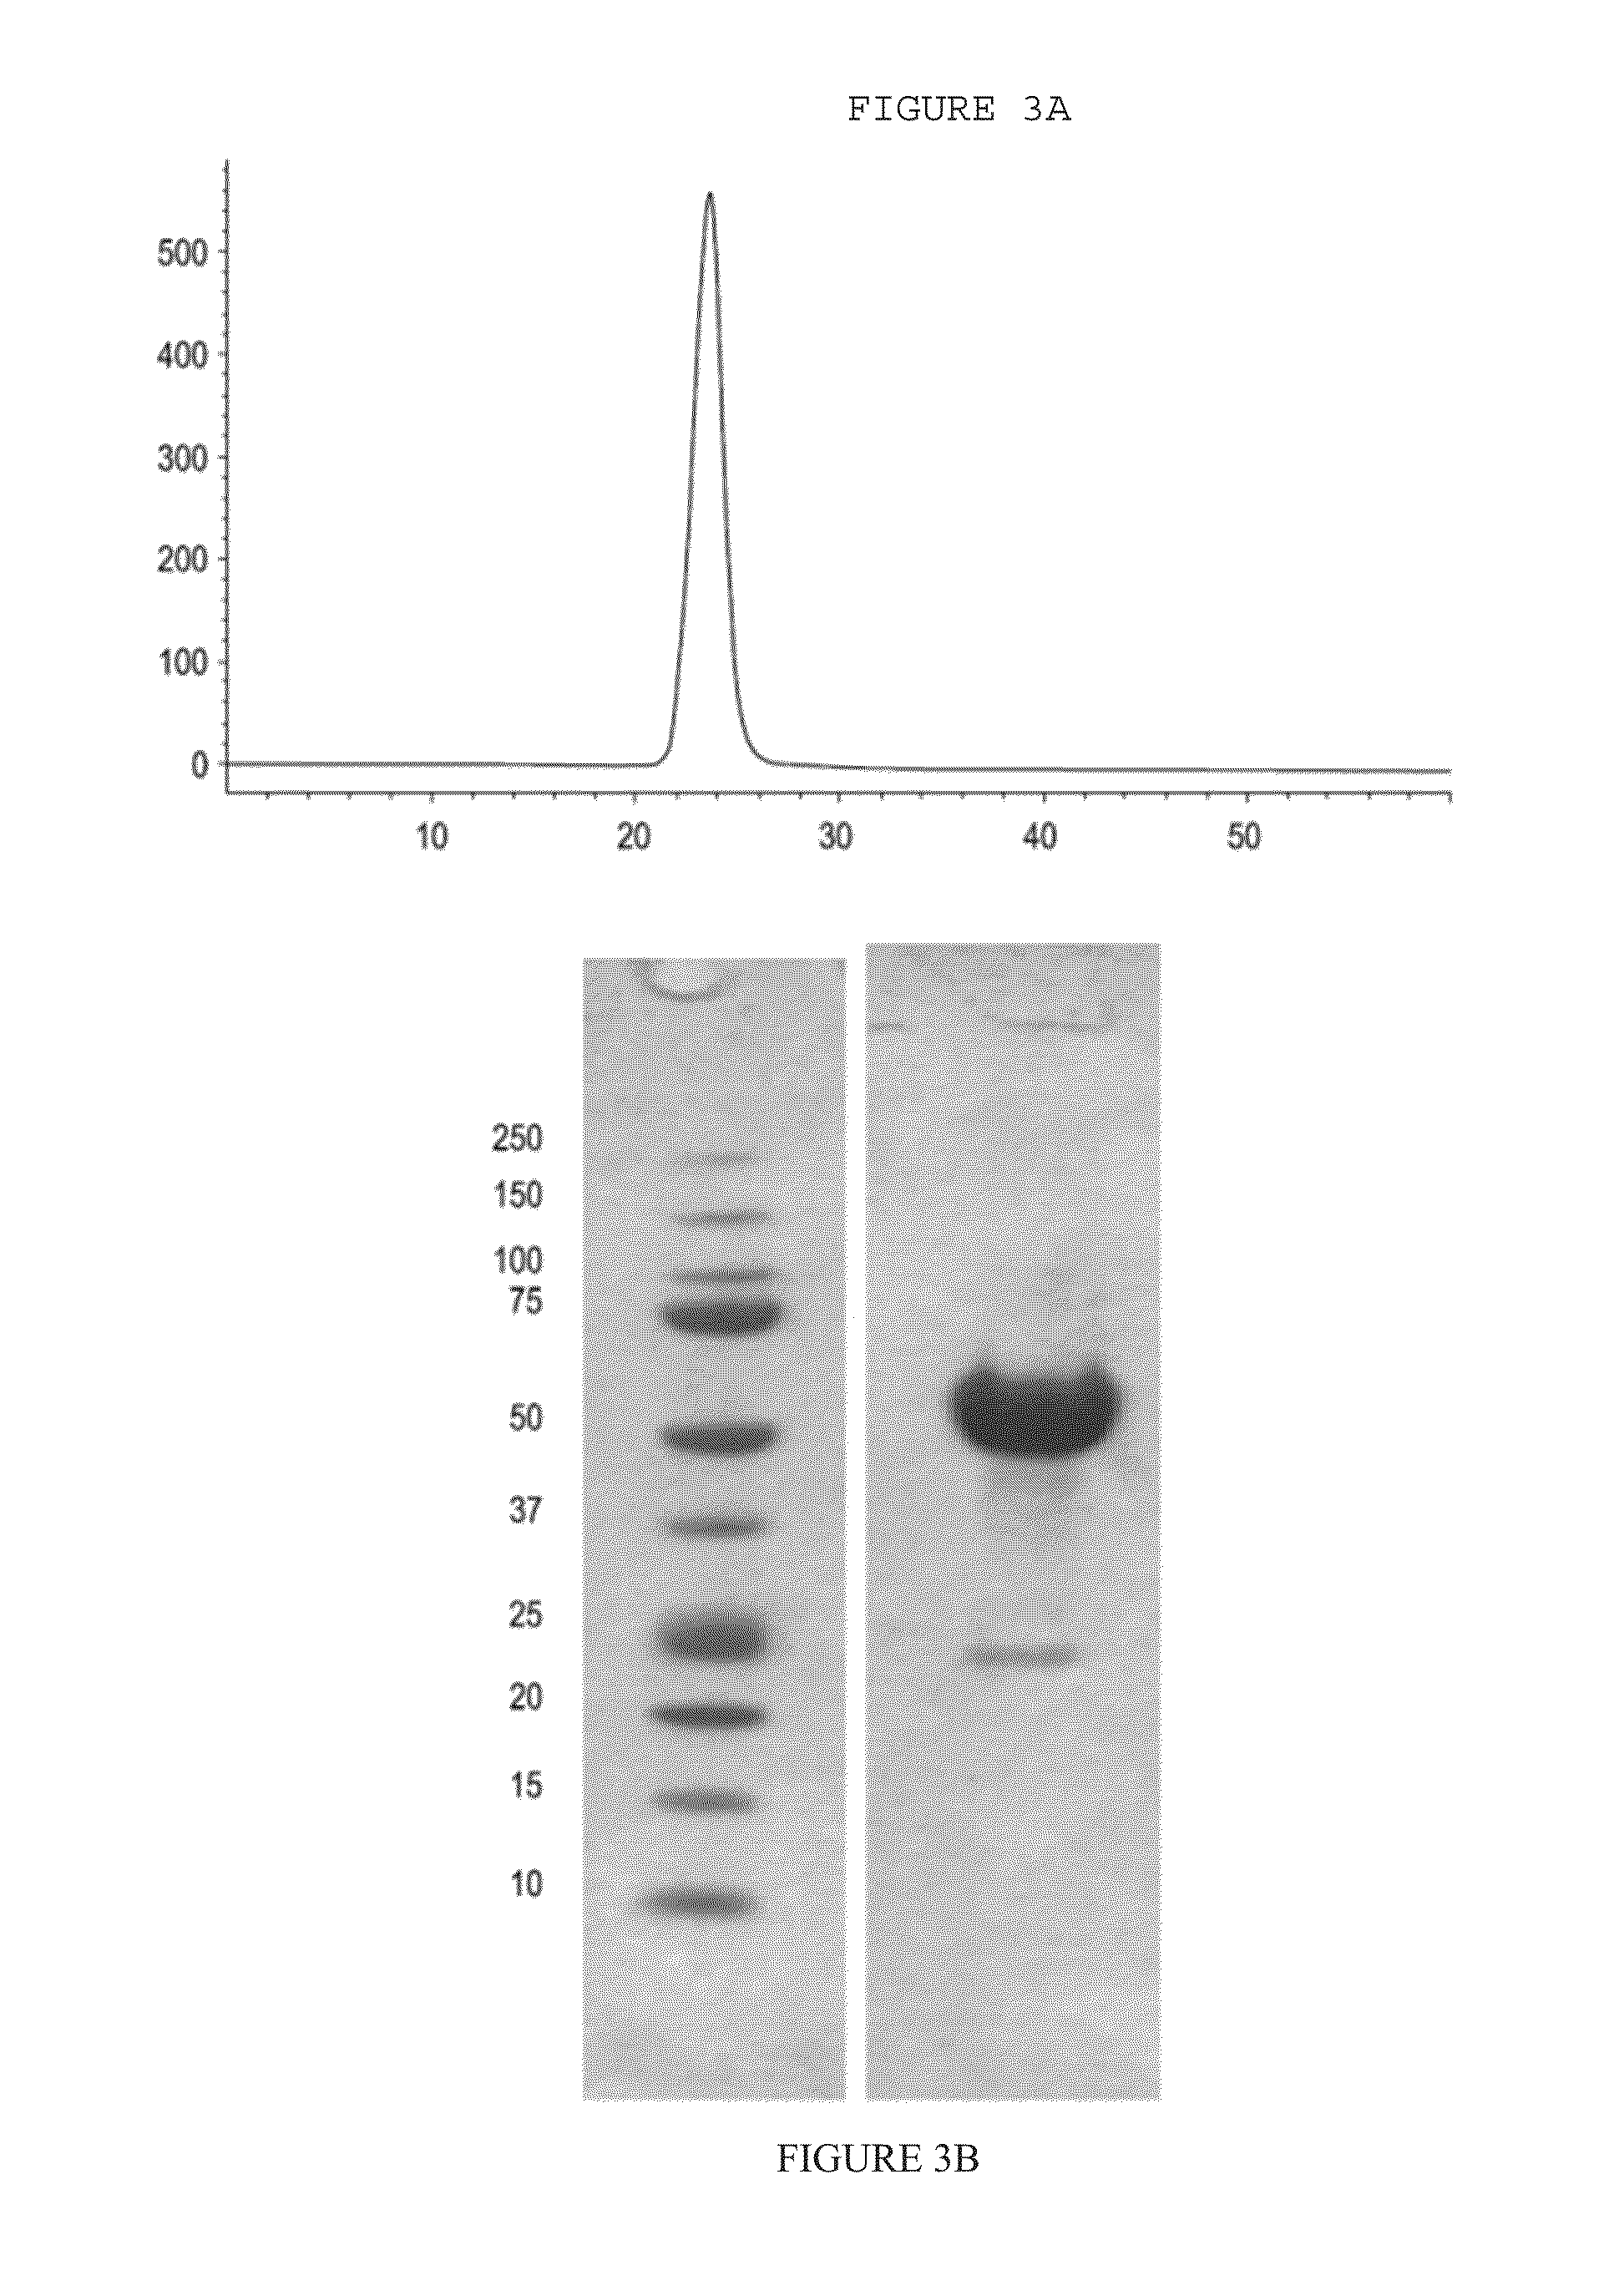 Methods for increasing red blood cell levels and treating sickle-cell disease